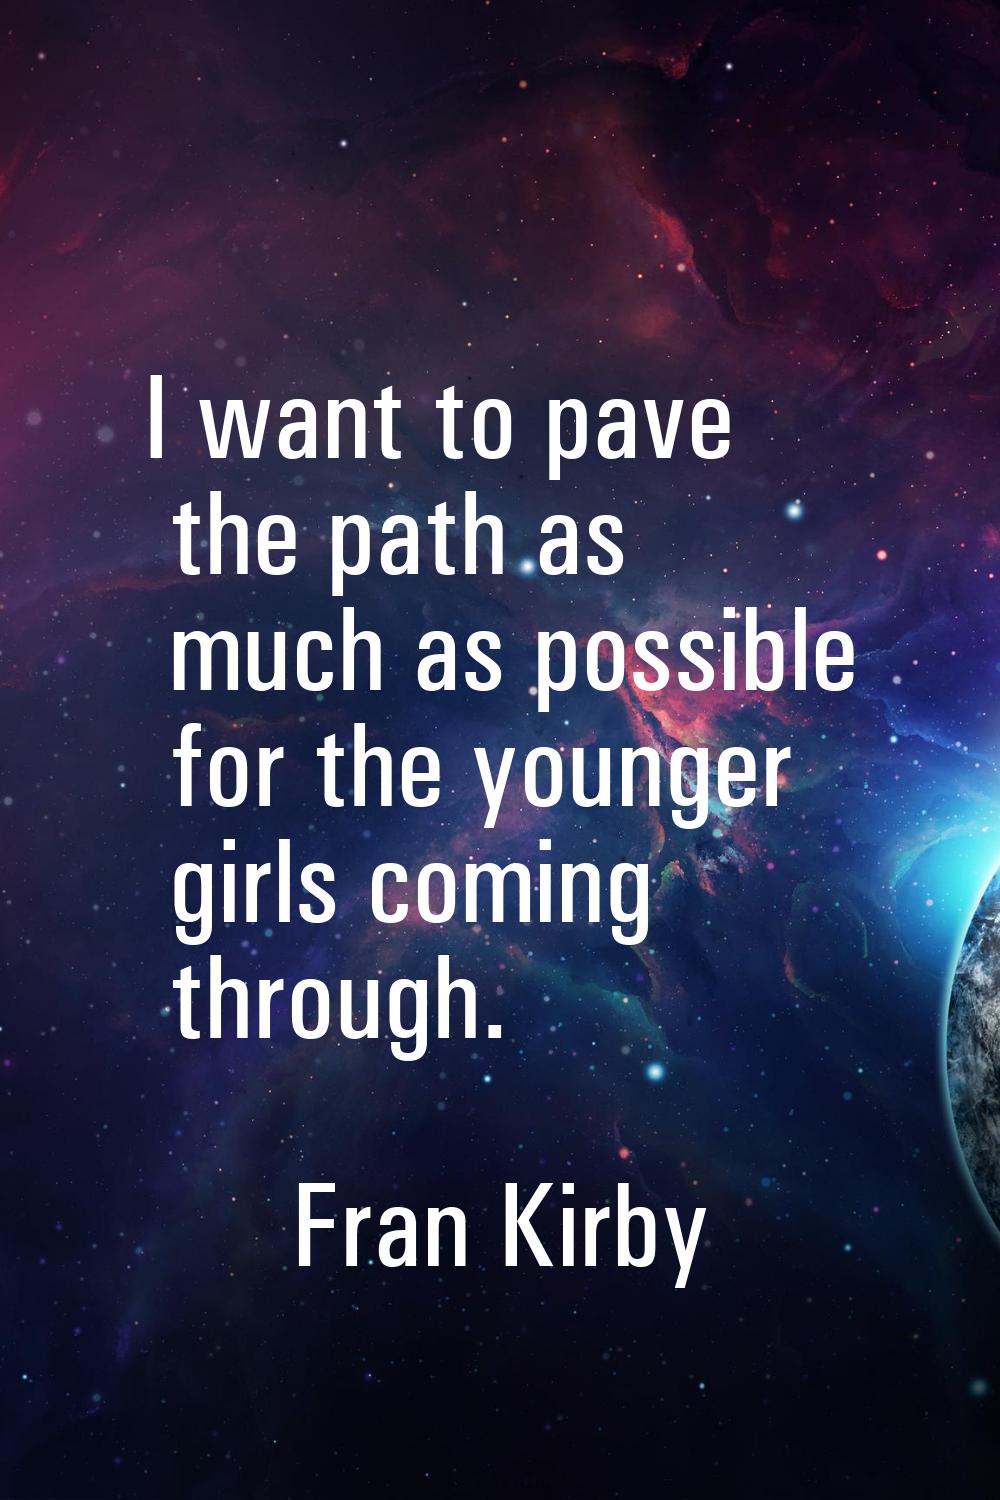 I want to pave the path as much as possible for the younger girls coming through.